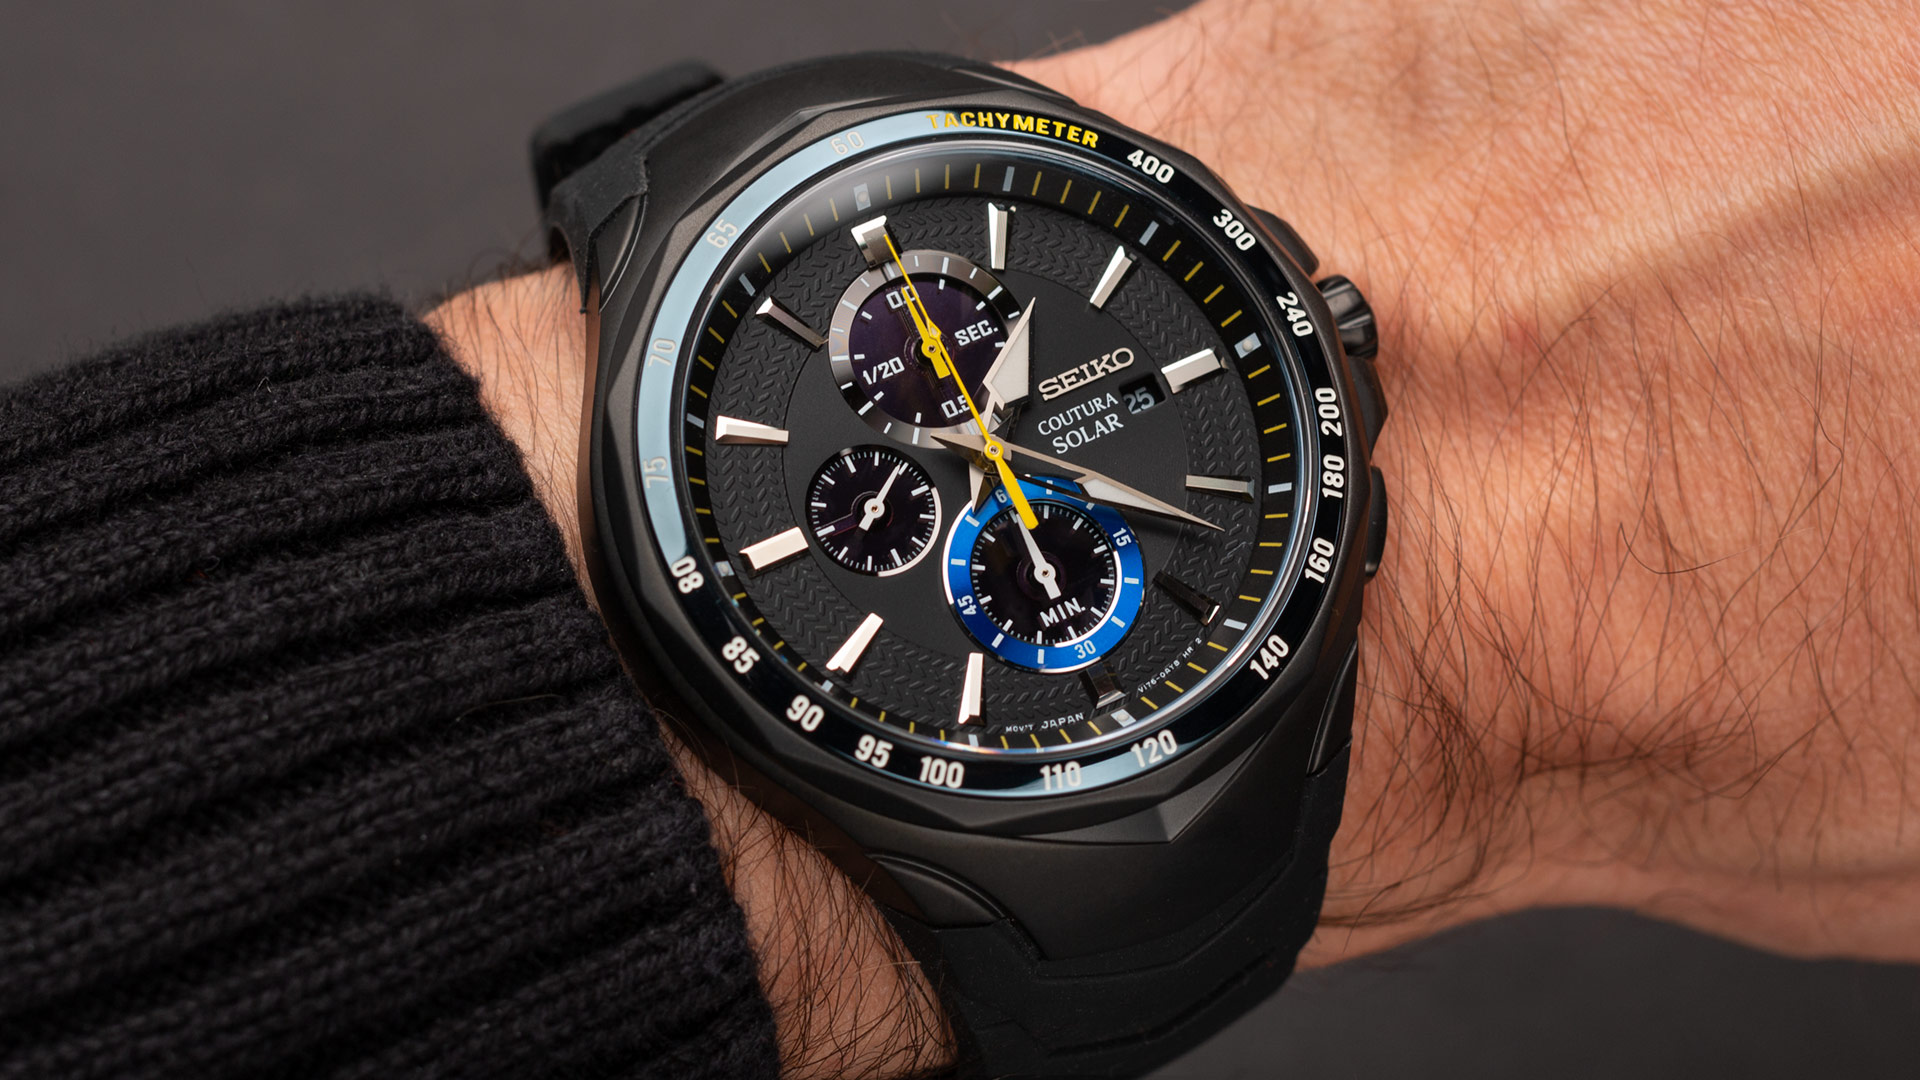 Seiko Coutura Solar Chronograph Jimmie Johnson Special Edition Watch Hands-On